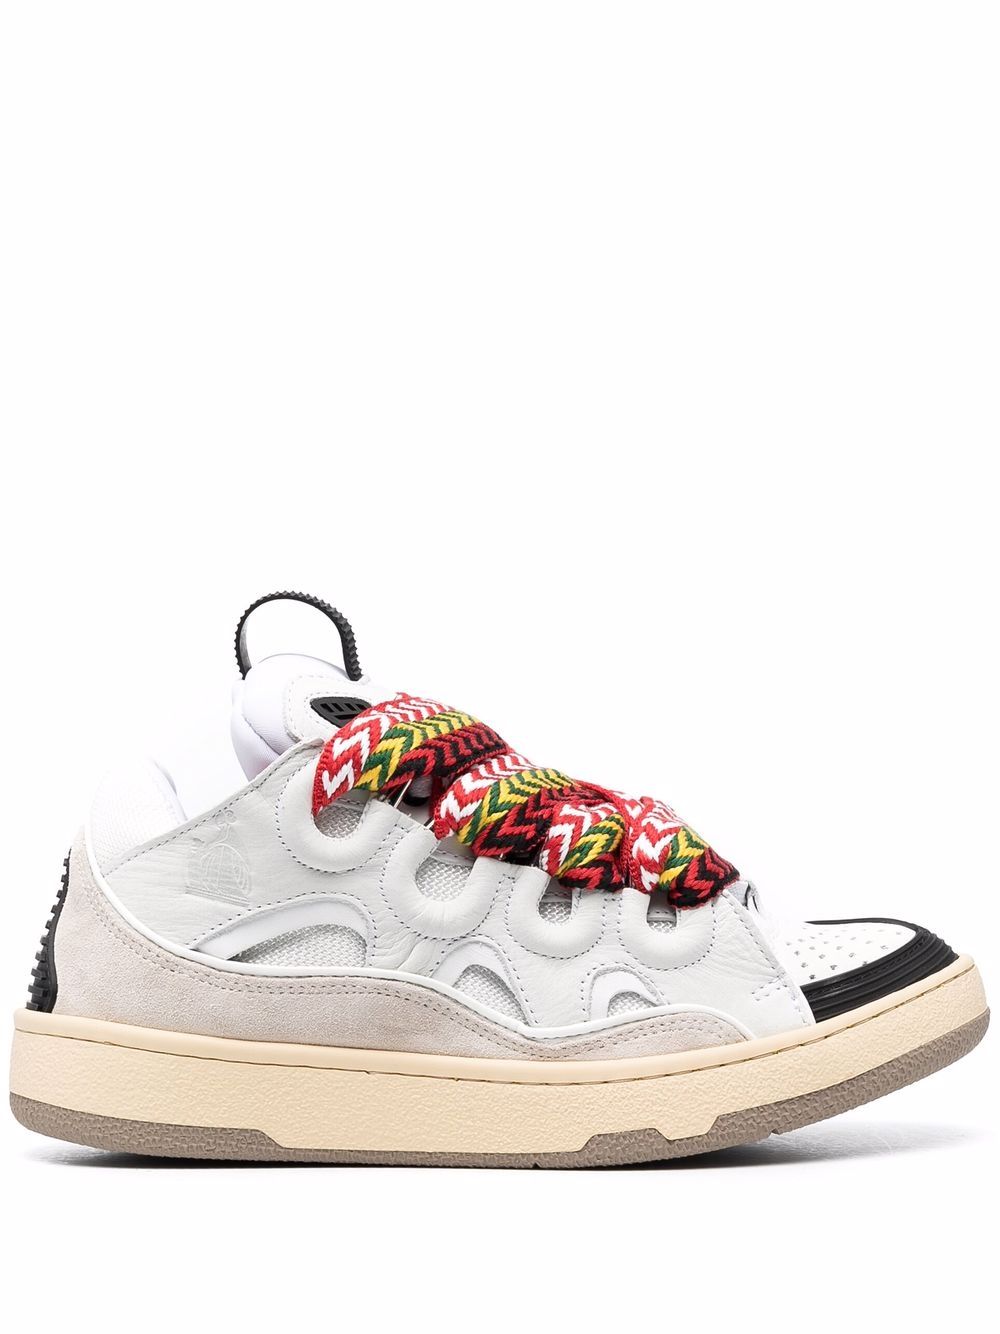 LANVIN Women Leather Curb Sneakers